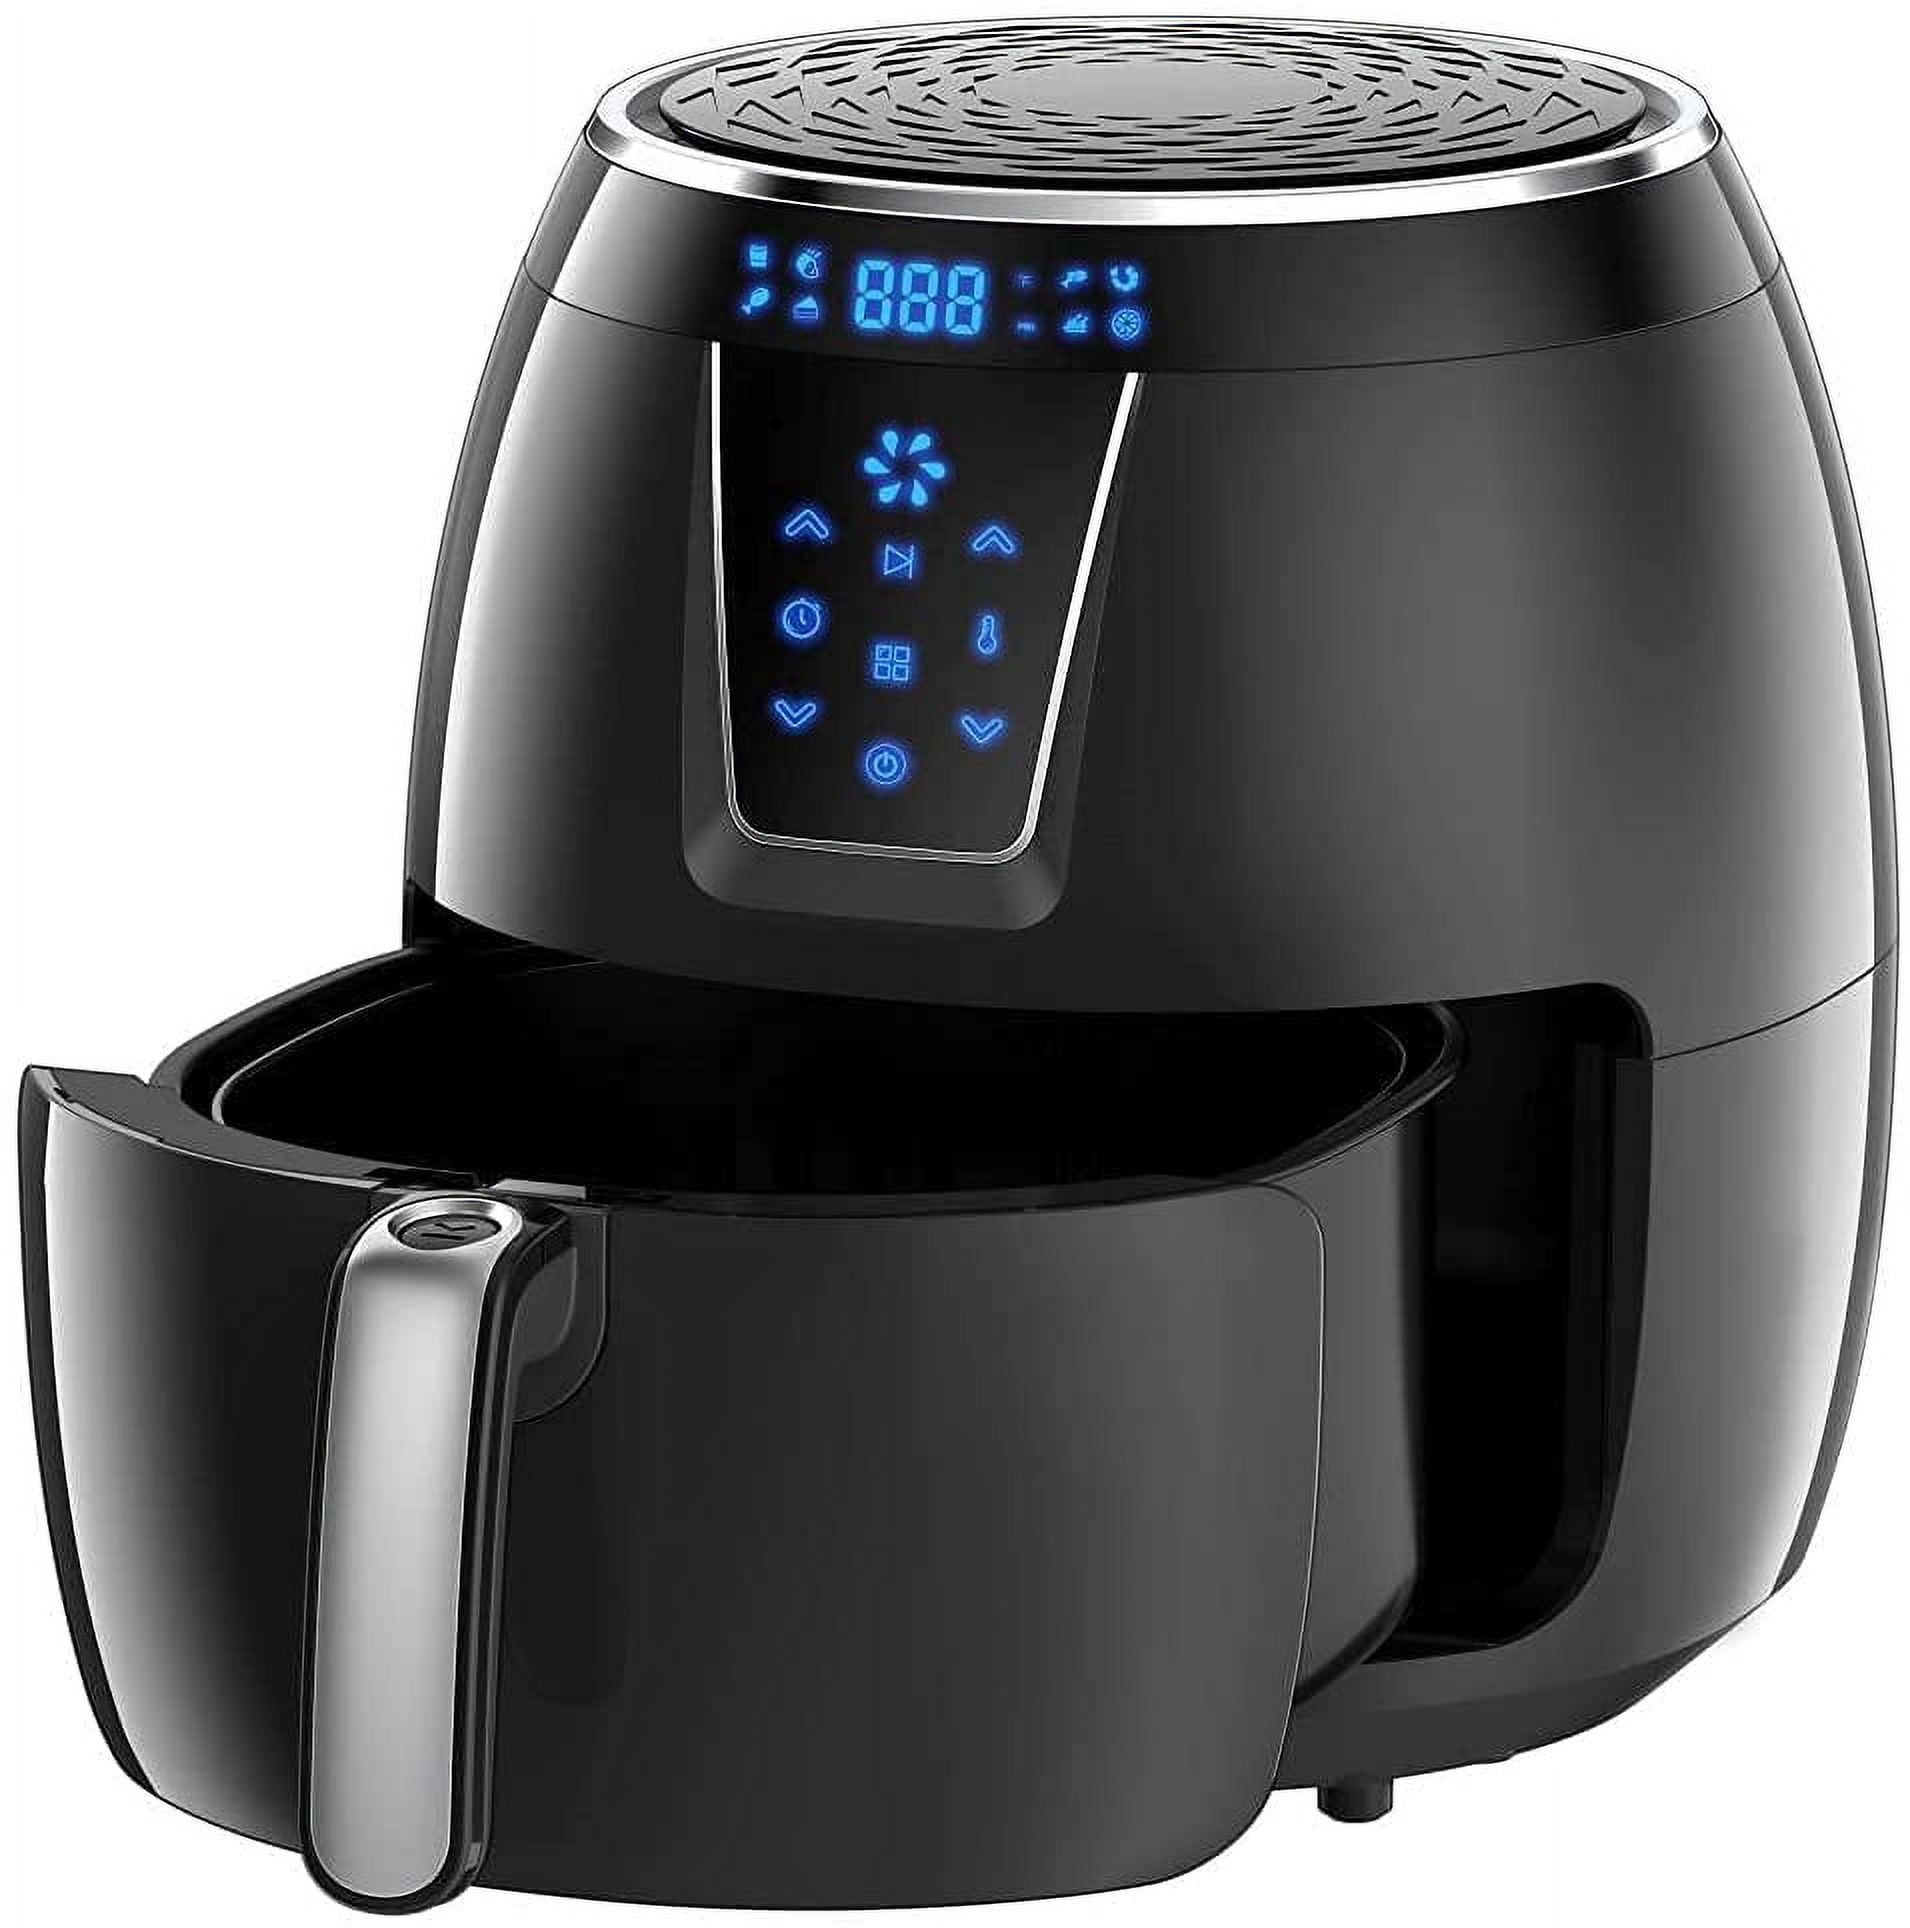 KitCook Air Fryer Oven, 1700W 12.7QT Large AirFryer, 8 Preset Modes, Air  Frier Cookers & Original Recipes Simple Rotisserie, Roast, Broil, Bake,  Reheat & Dehydrate for Kitchen Novice Gift 